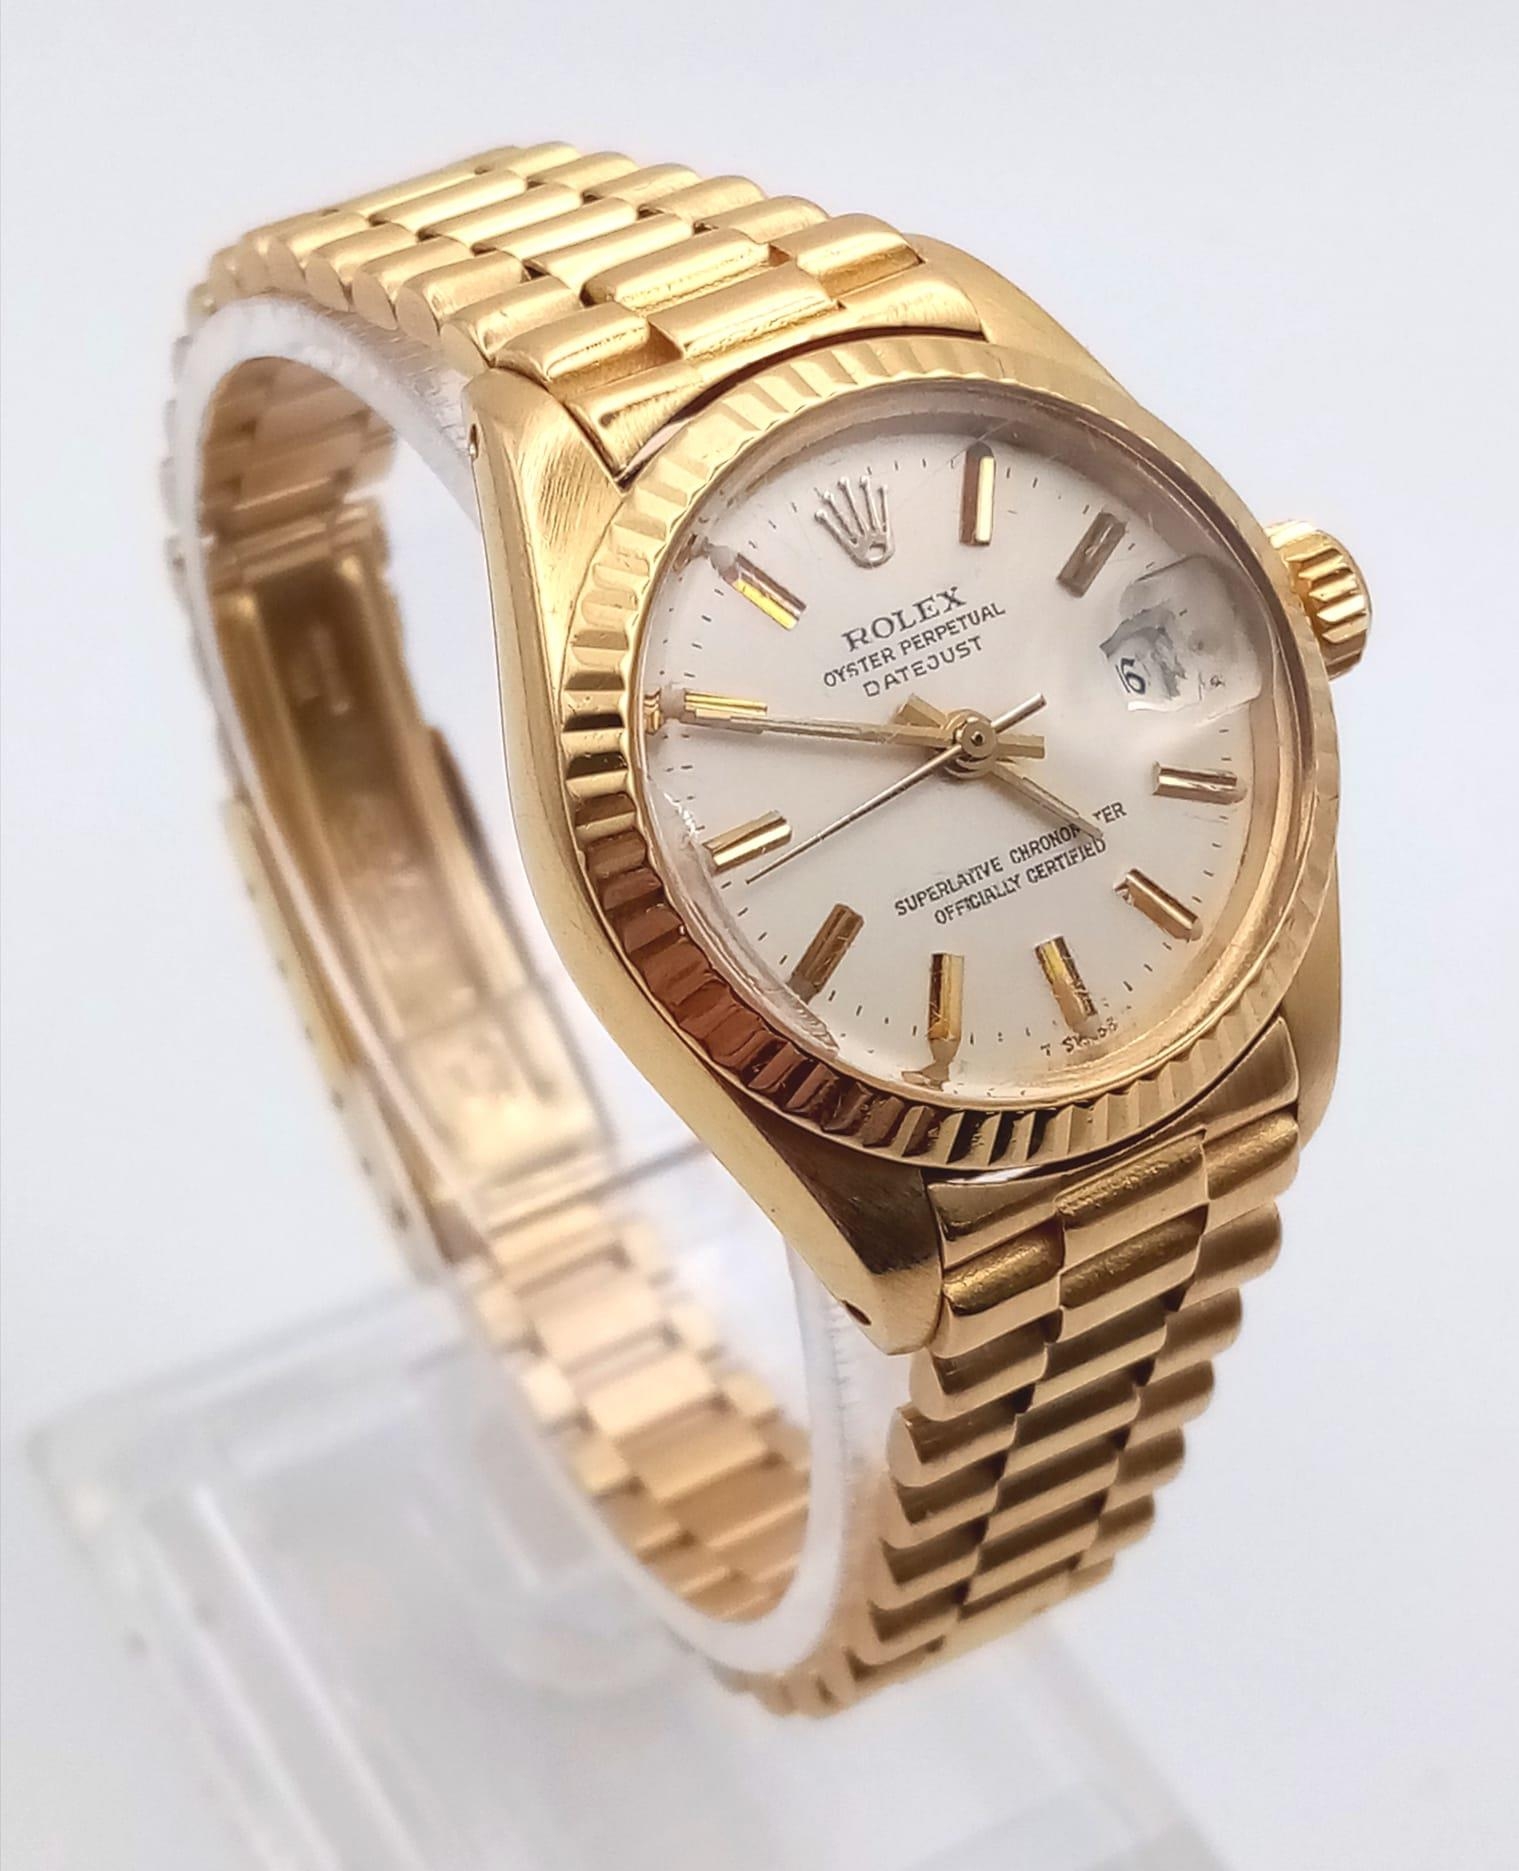 A Gold Rolex Oyster Perpetual Datejust Ladies Watch. Gold bracelet and case - 26mm. Automatic